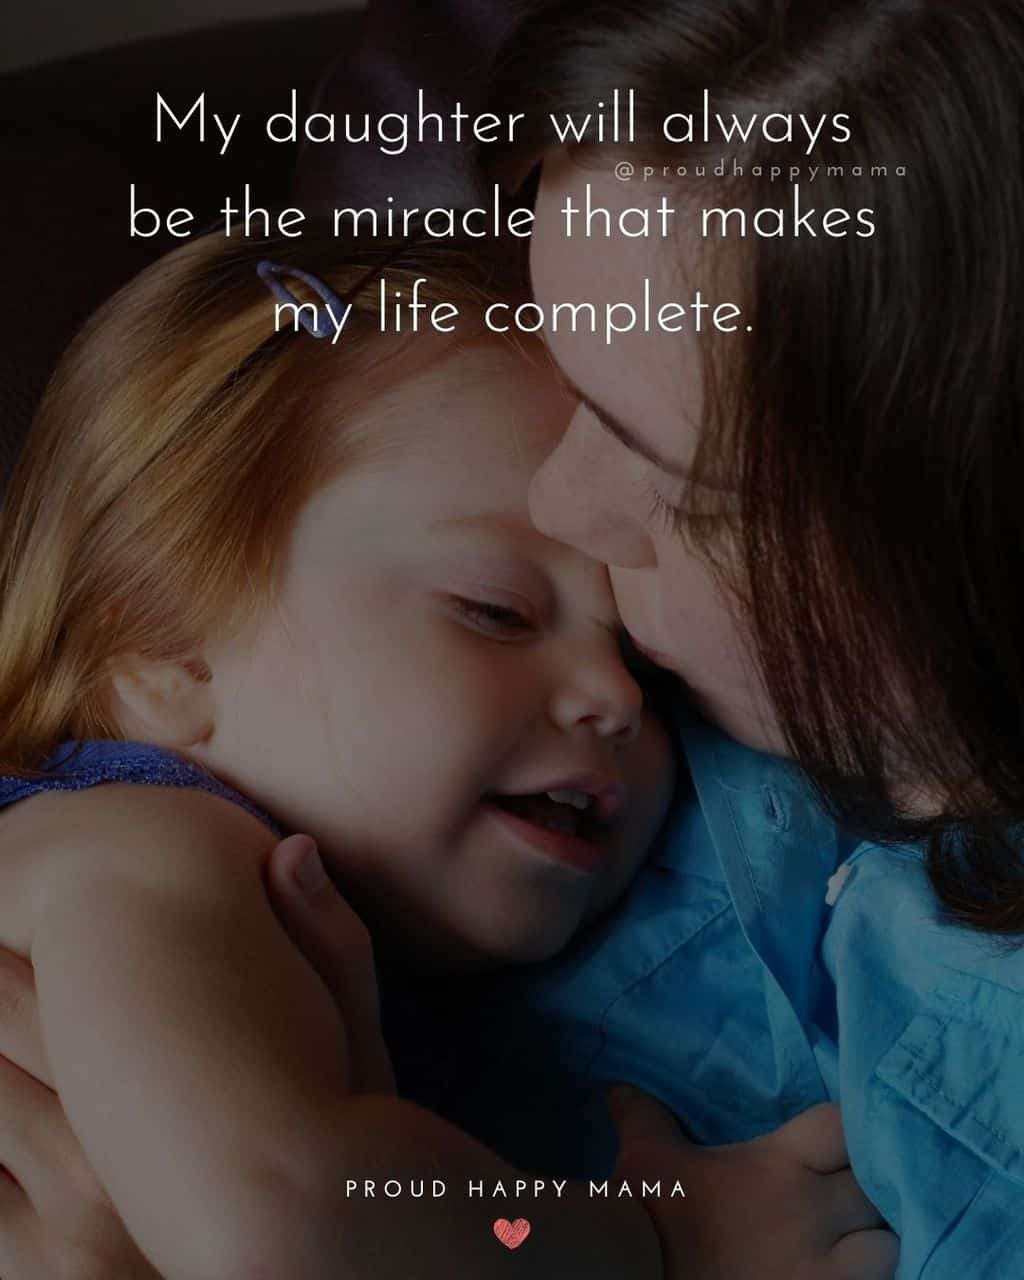 Daughter Quotes - ‘My daughter will always be the miracle that makes my life complete.’